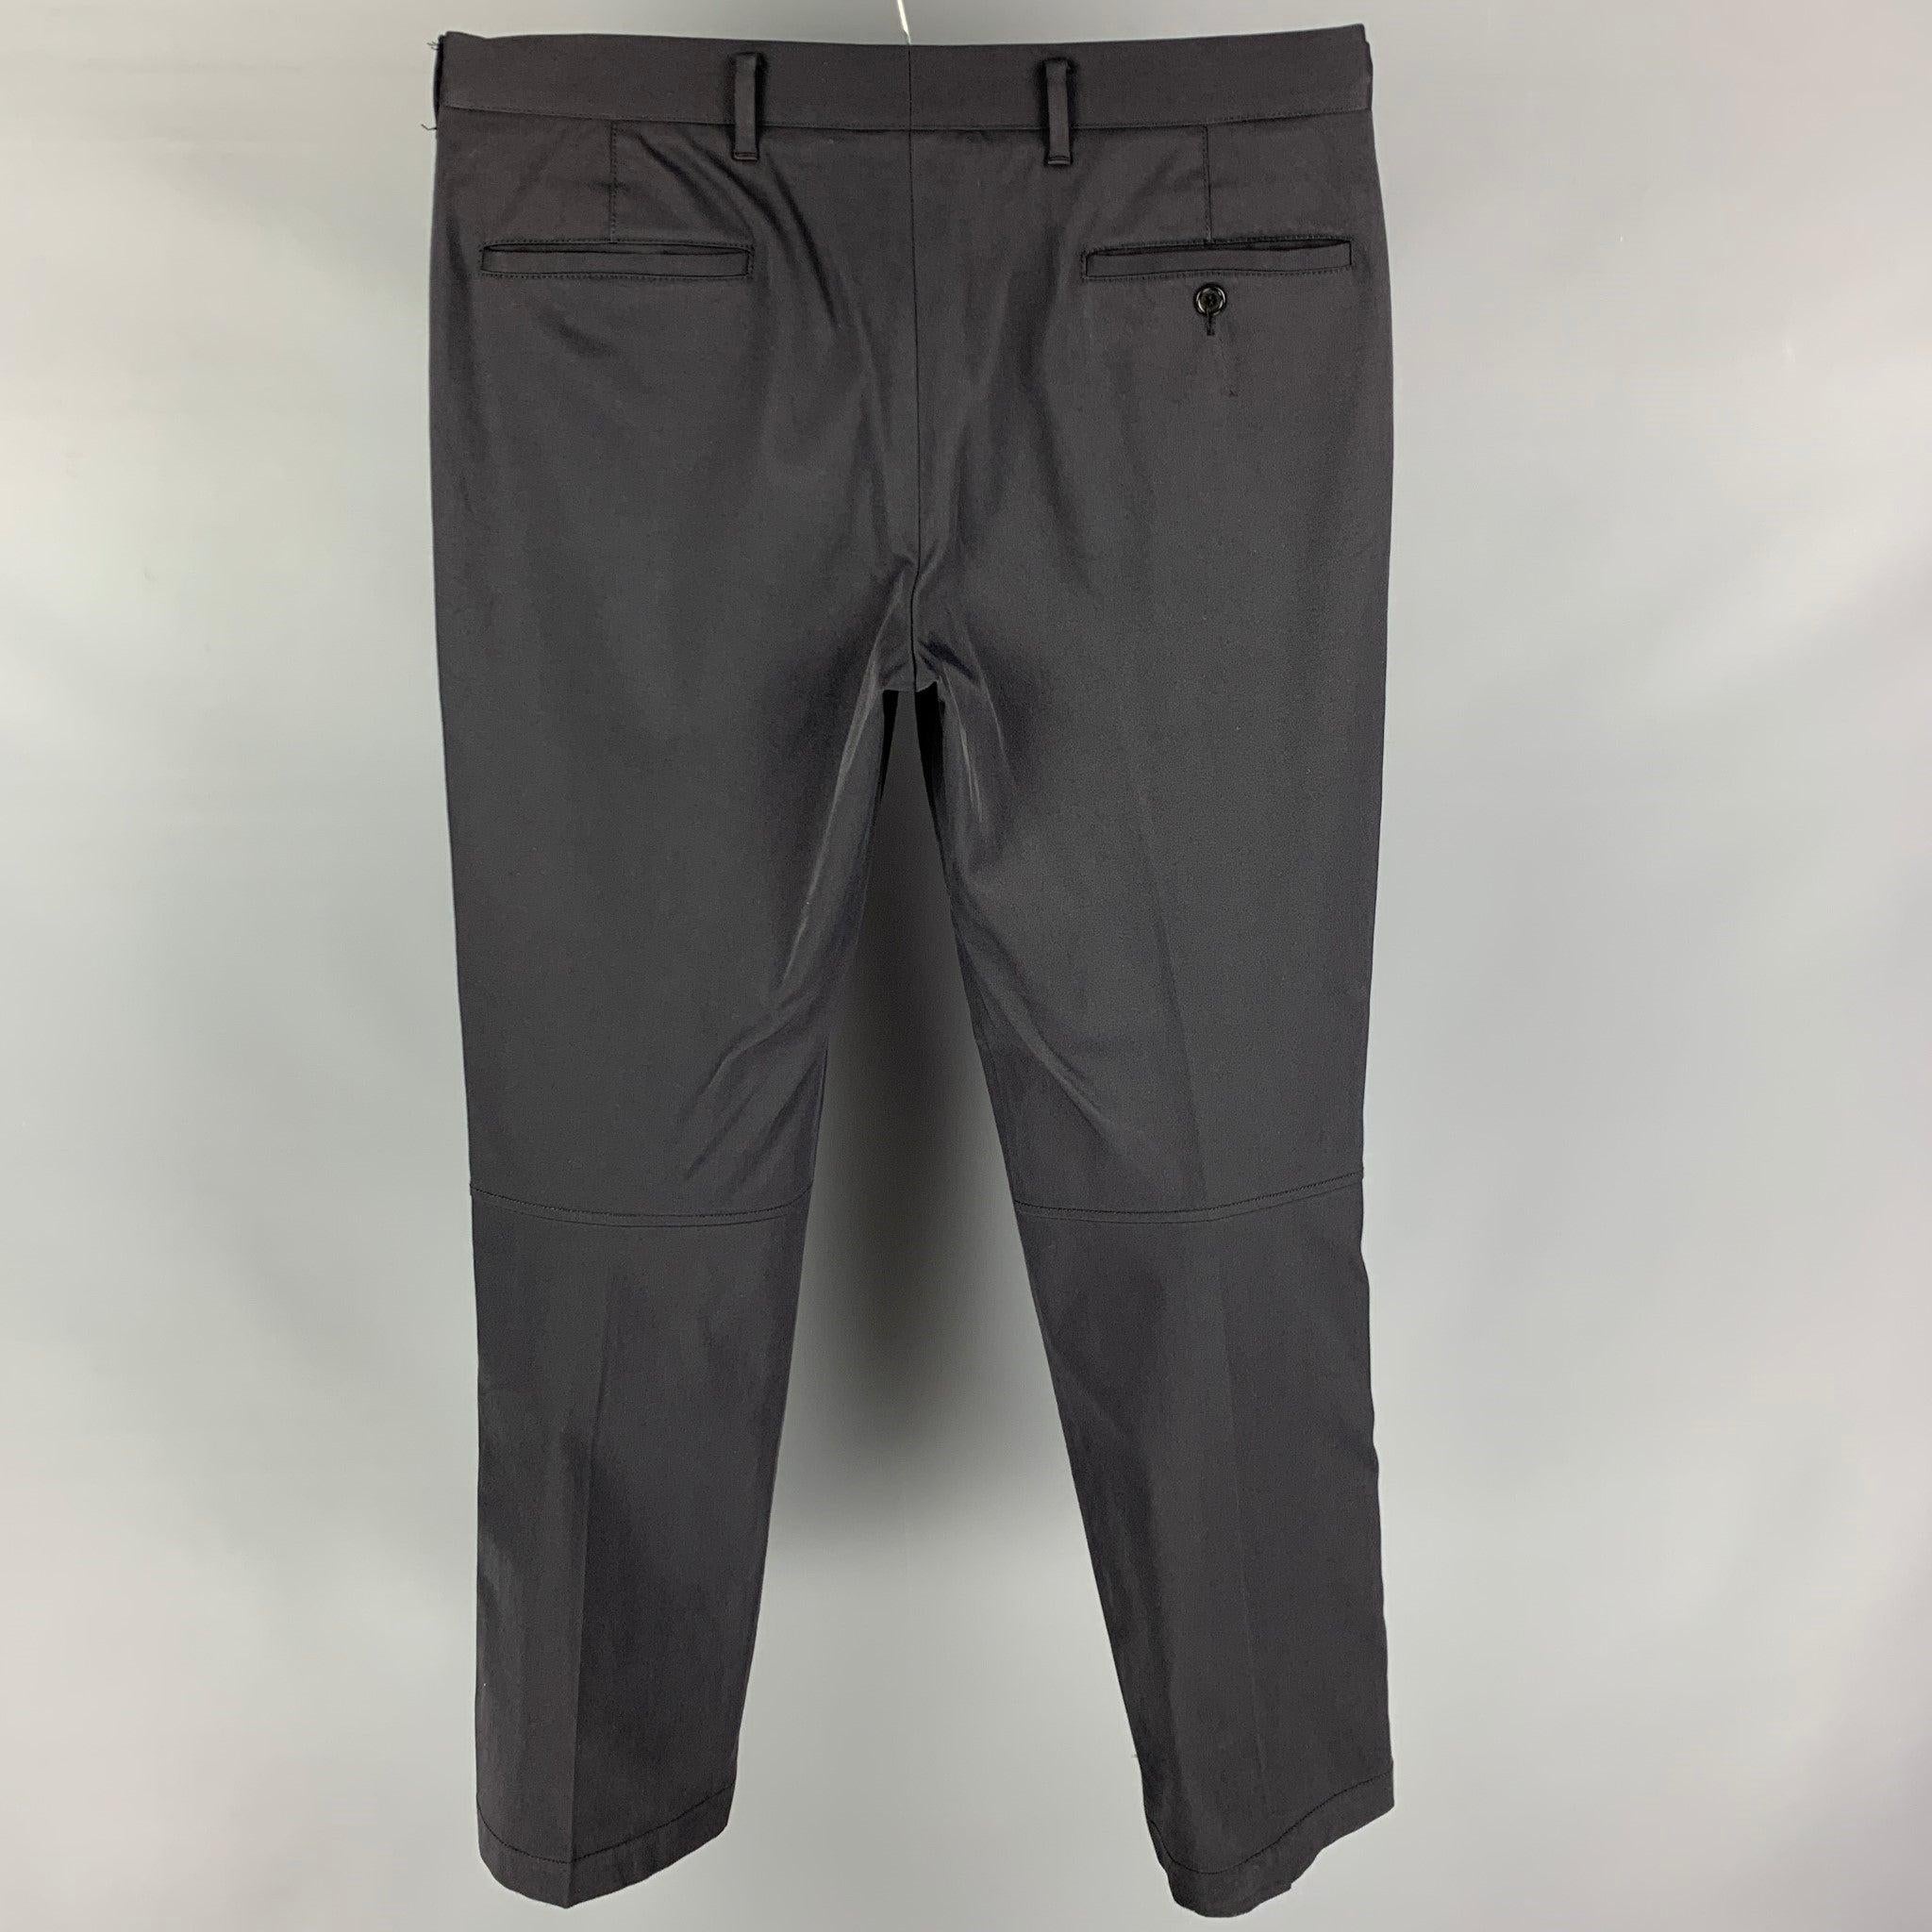 PRADA Size 36 Black Cotton Blend Zip Fly Dress Pants In Good Condition For Sale In San Francisco, CA